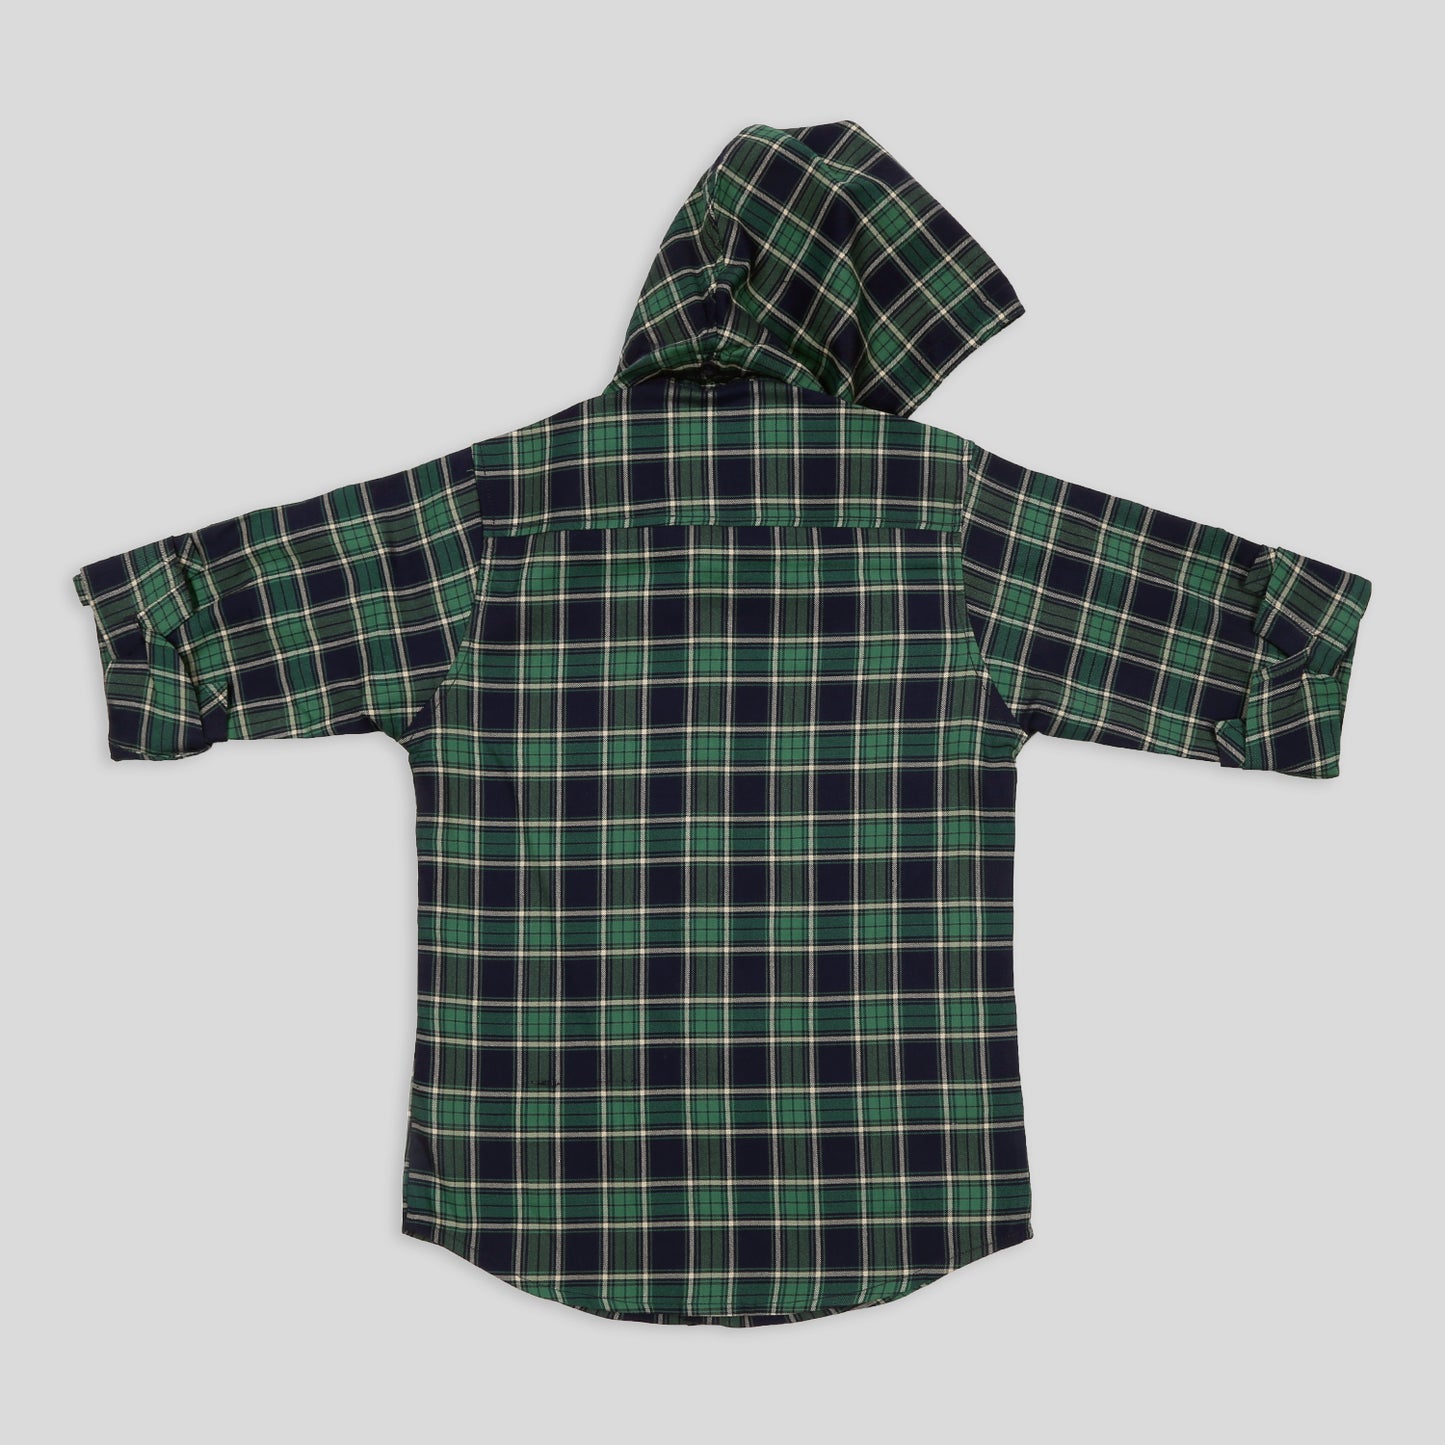 Lycra Checkered Hoodie Shirt and T-shirt Set  For Young Boys